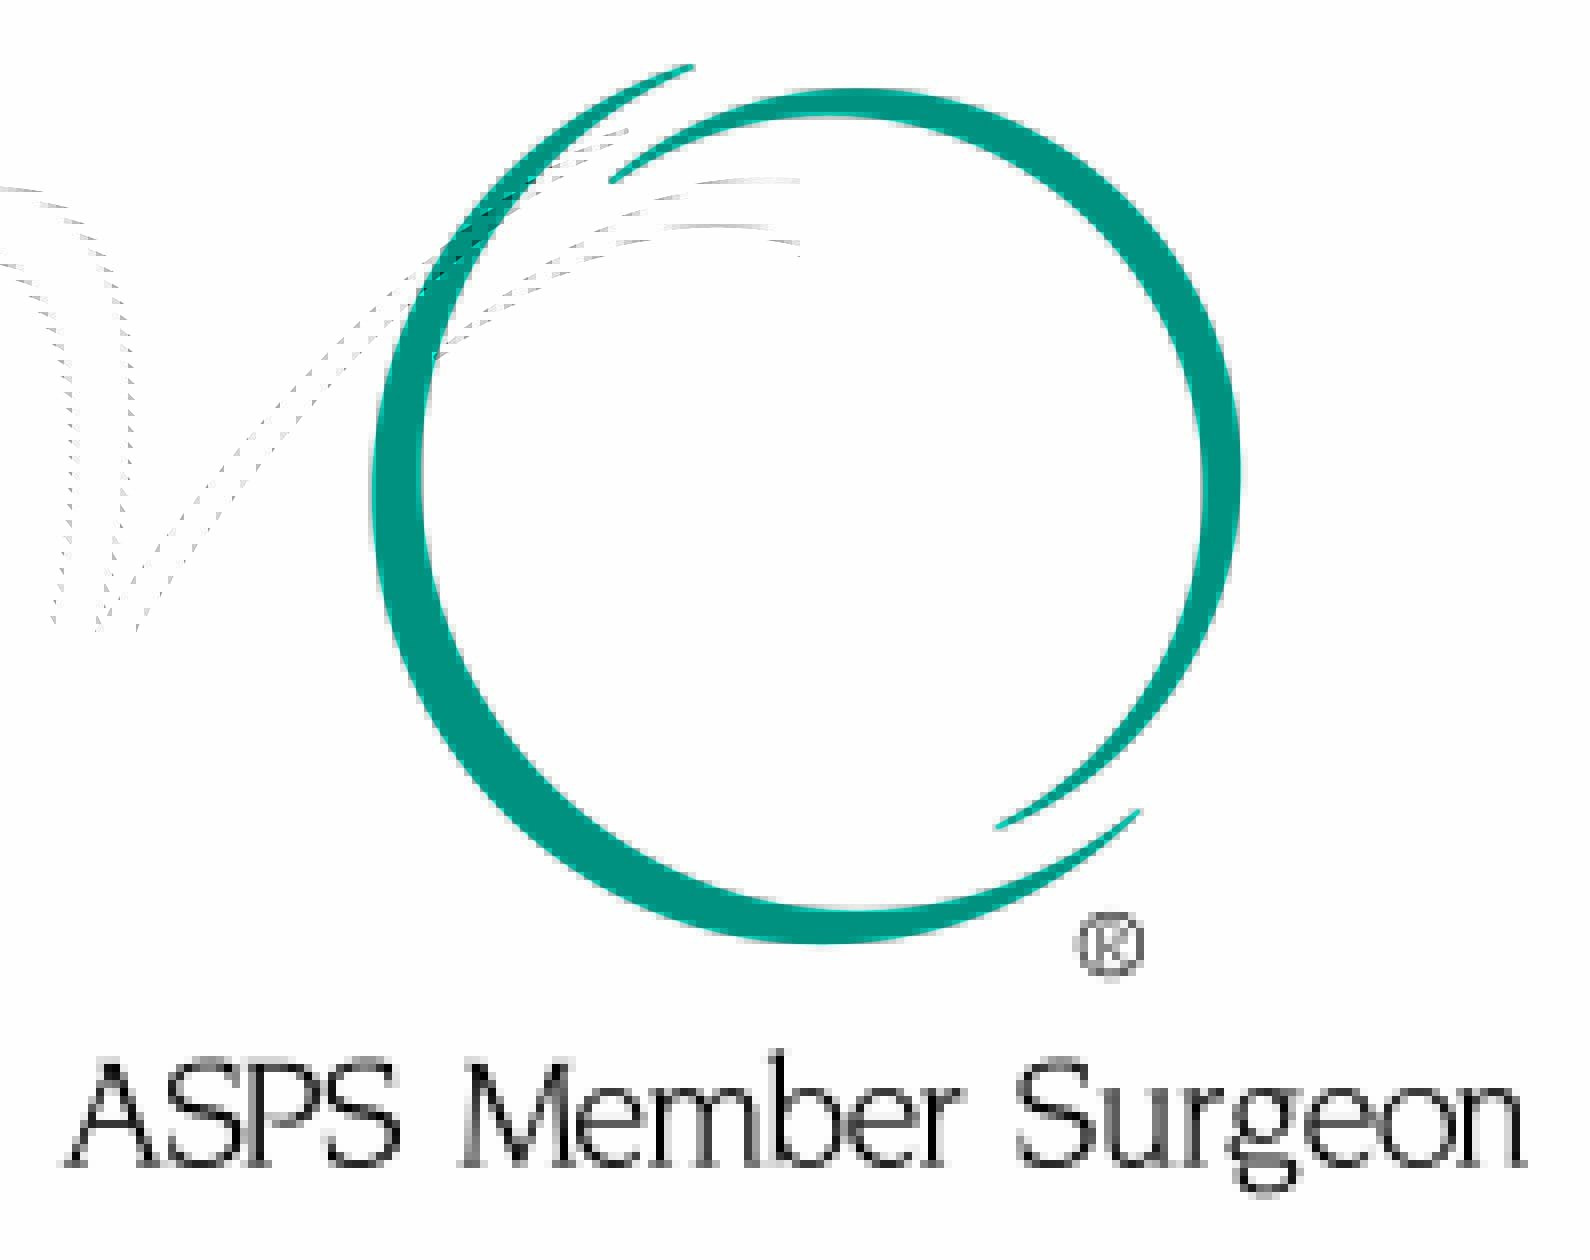 Dr. Mele is and active member of The American Society of Plastic Surgeons